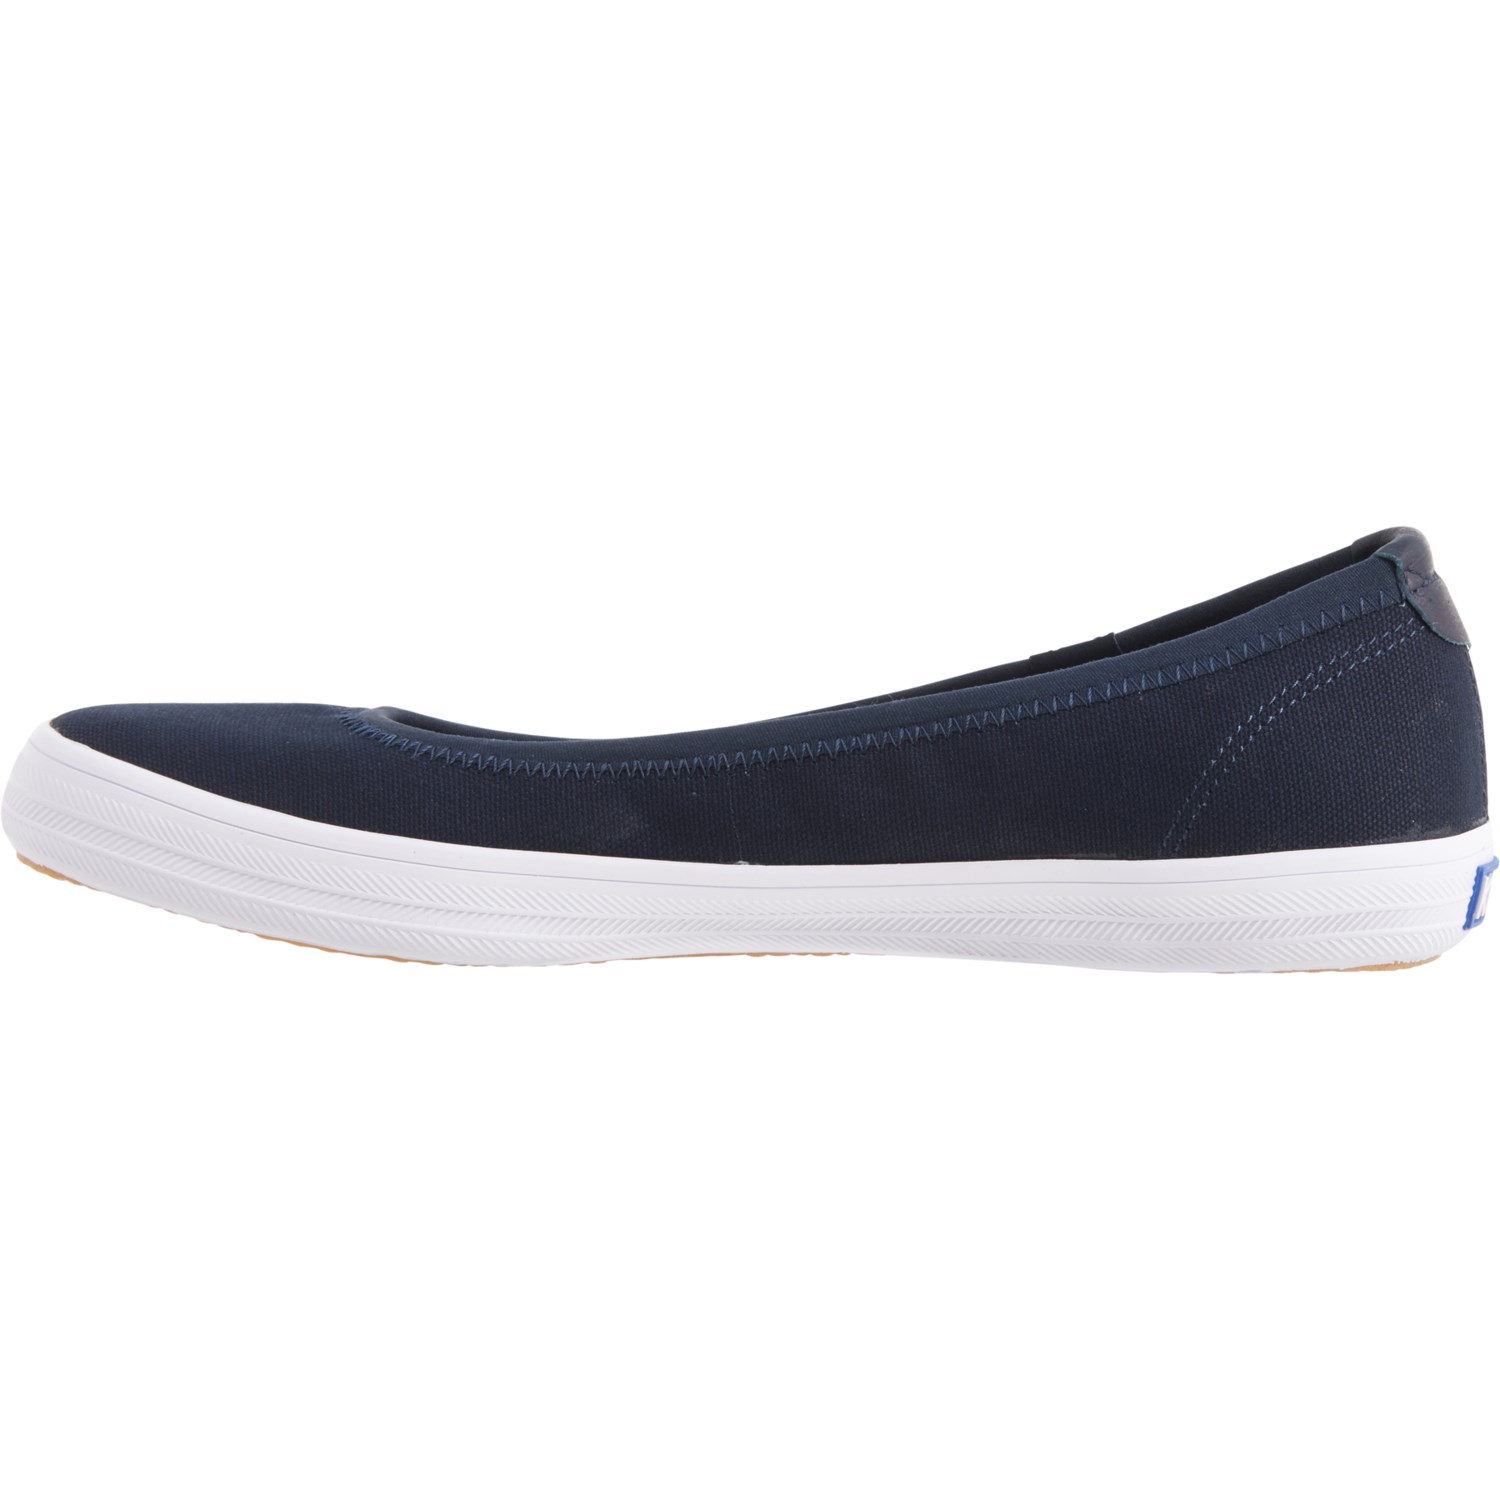 Keds Bryn Canvas Sneakers (For Women) - Save 40%